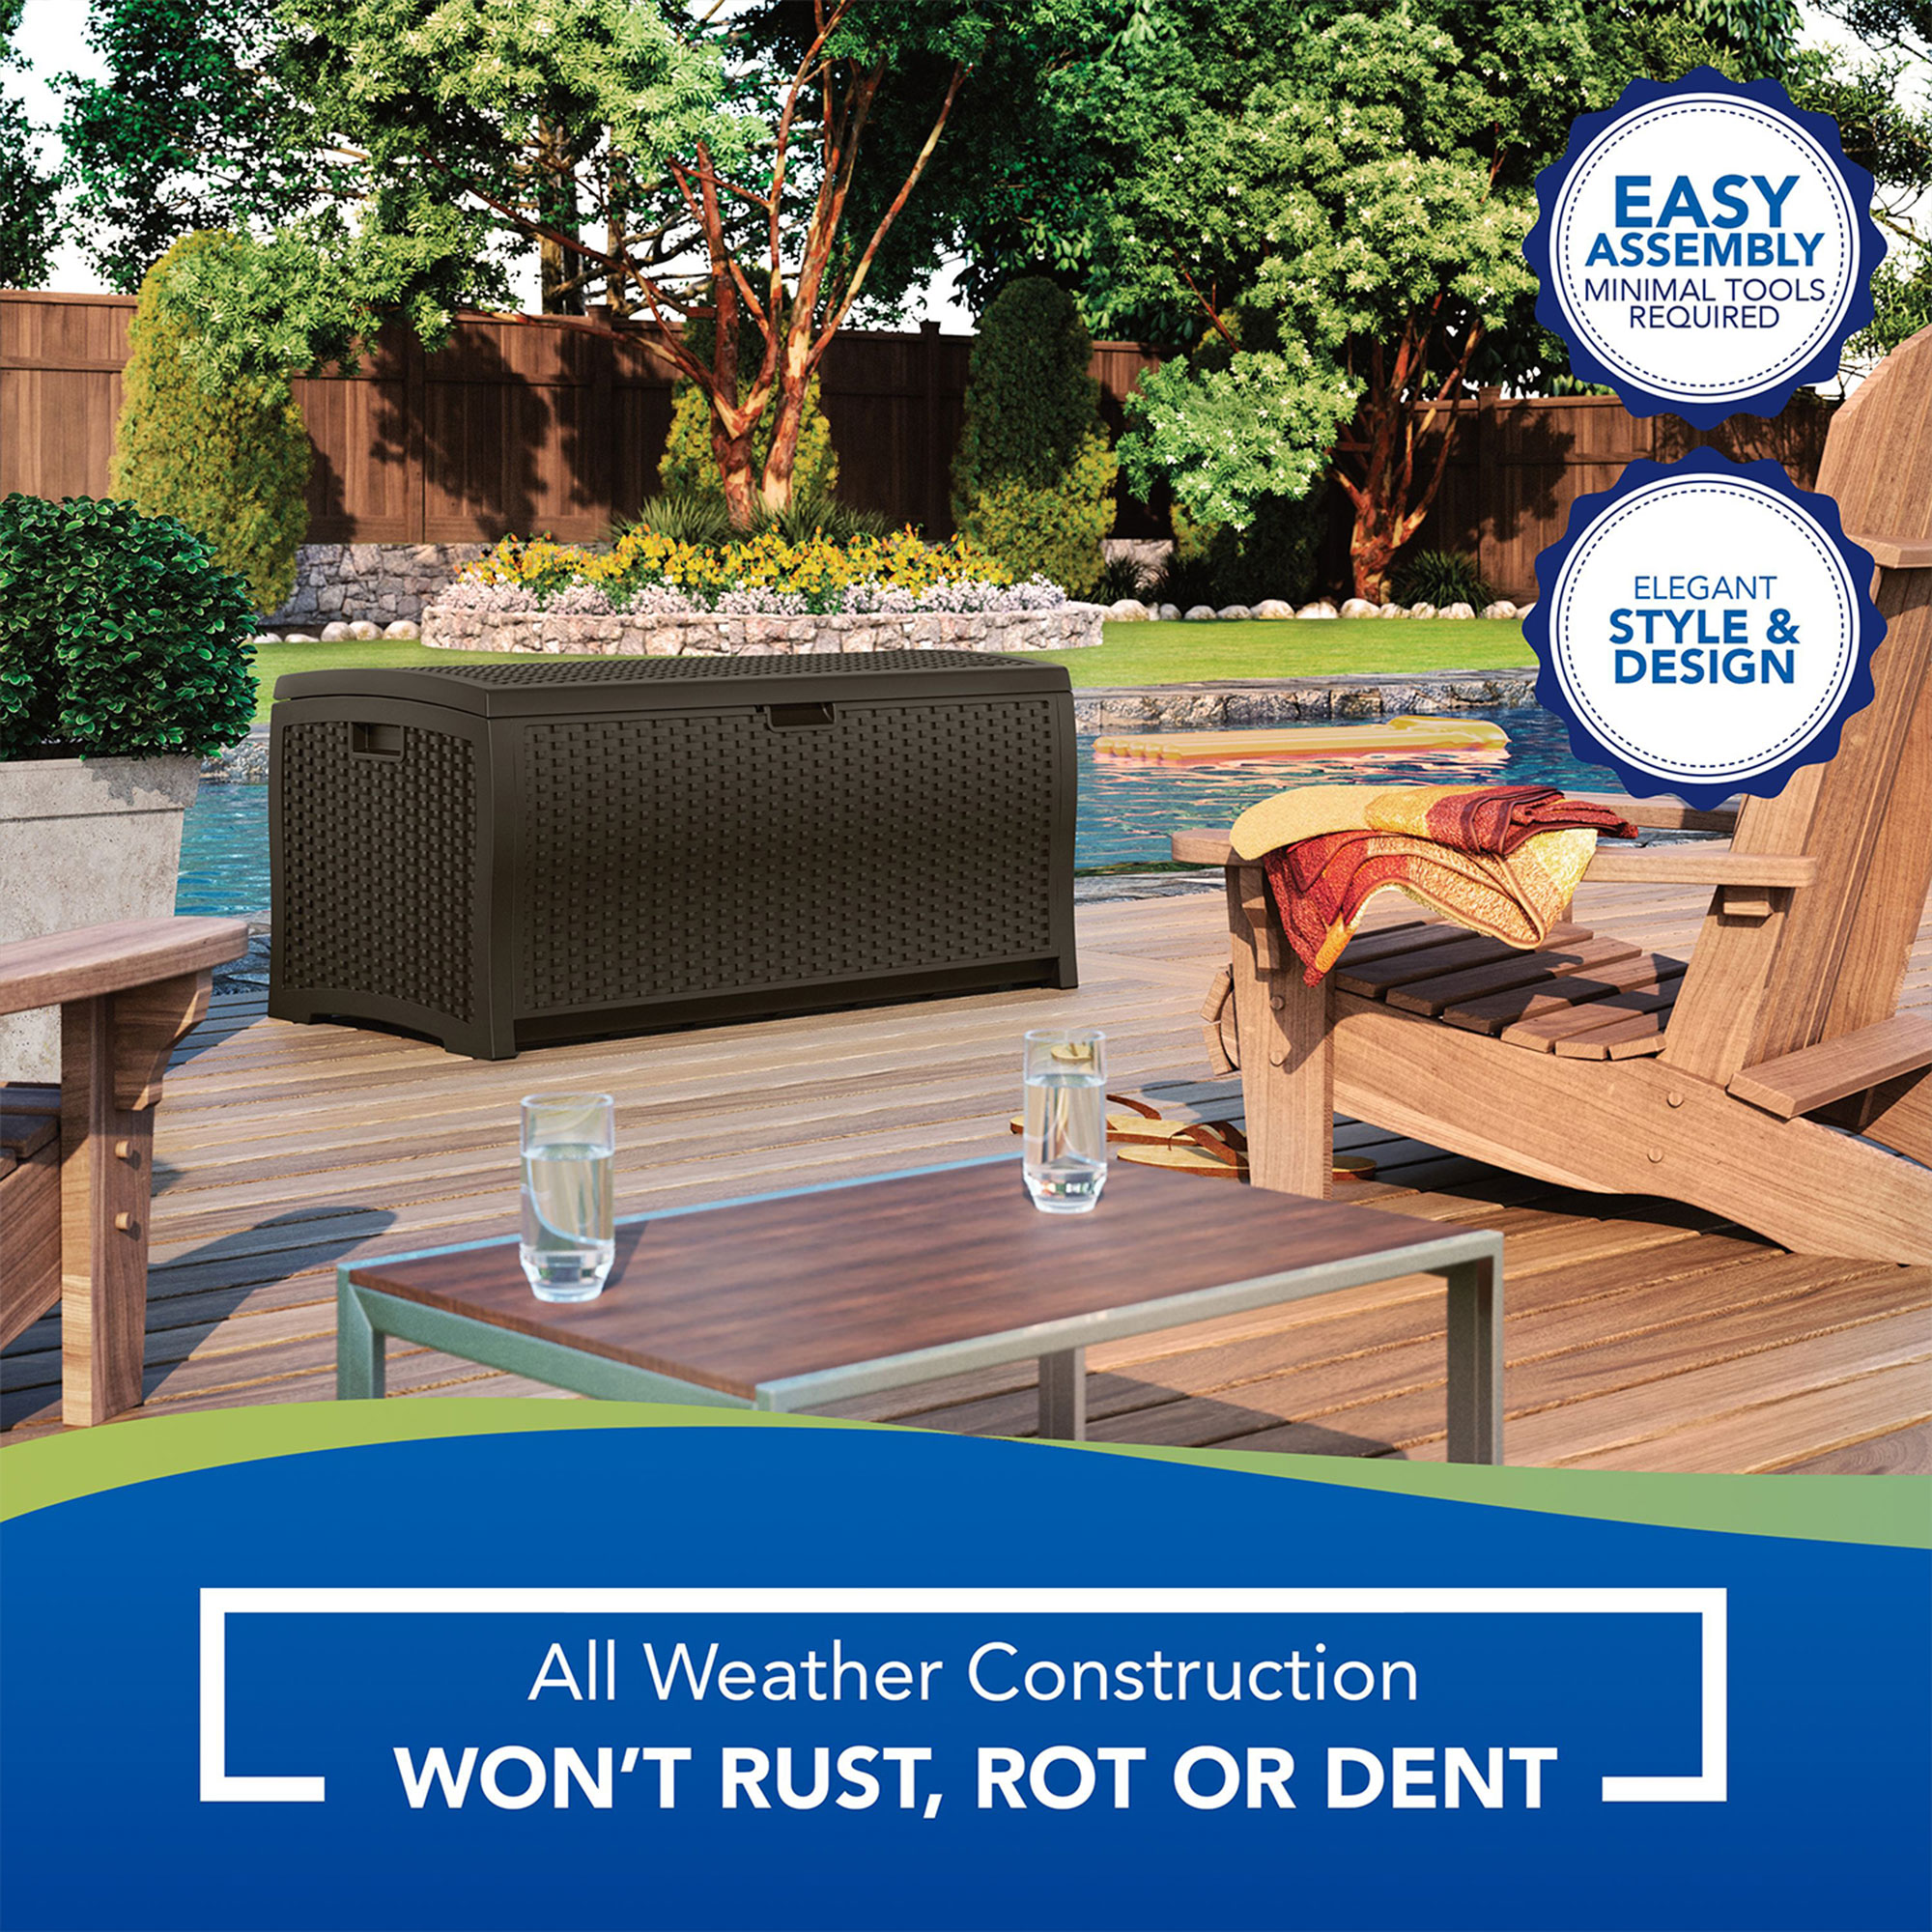 Suncast Indoor and Outdoor 73 Gallon Resin Deck Box with Seat, Mocha Brown, 46 in D x 22.5 in H x 21.6 in W - image 5 of 8